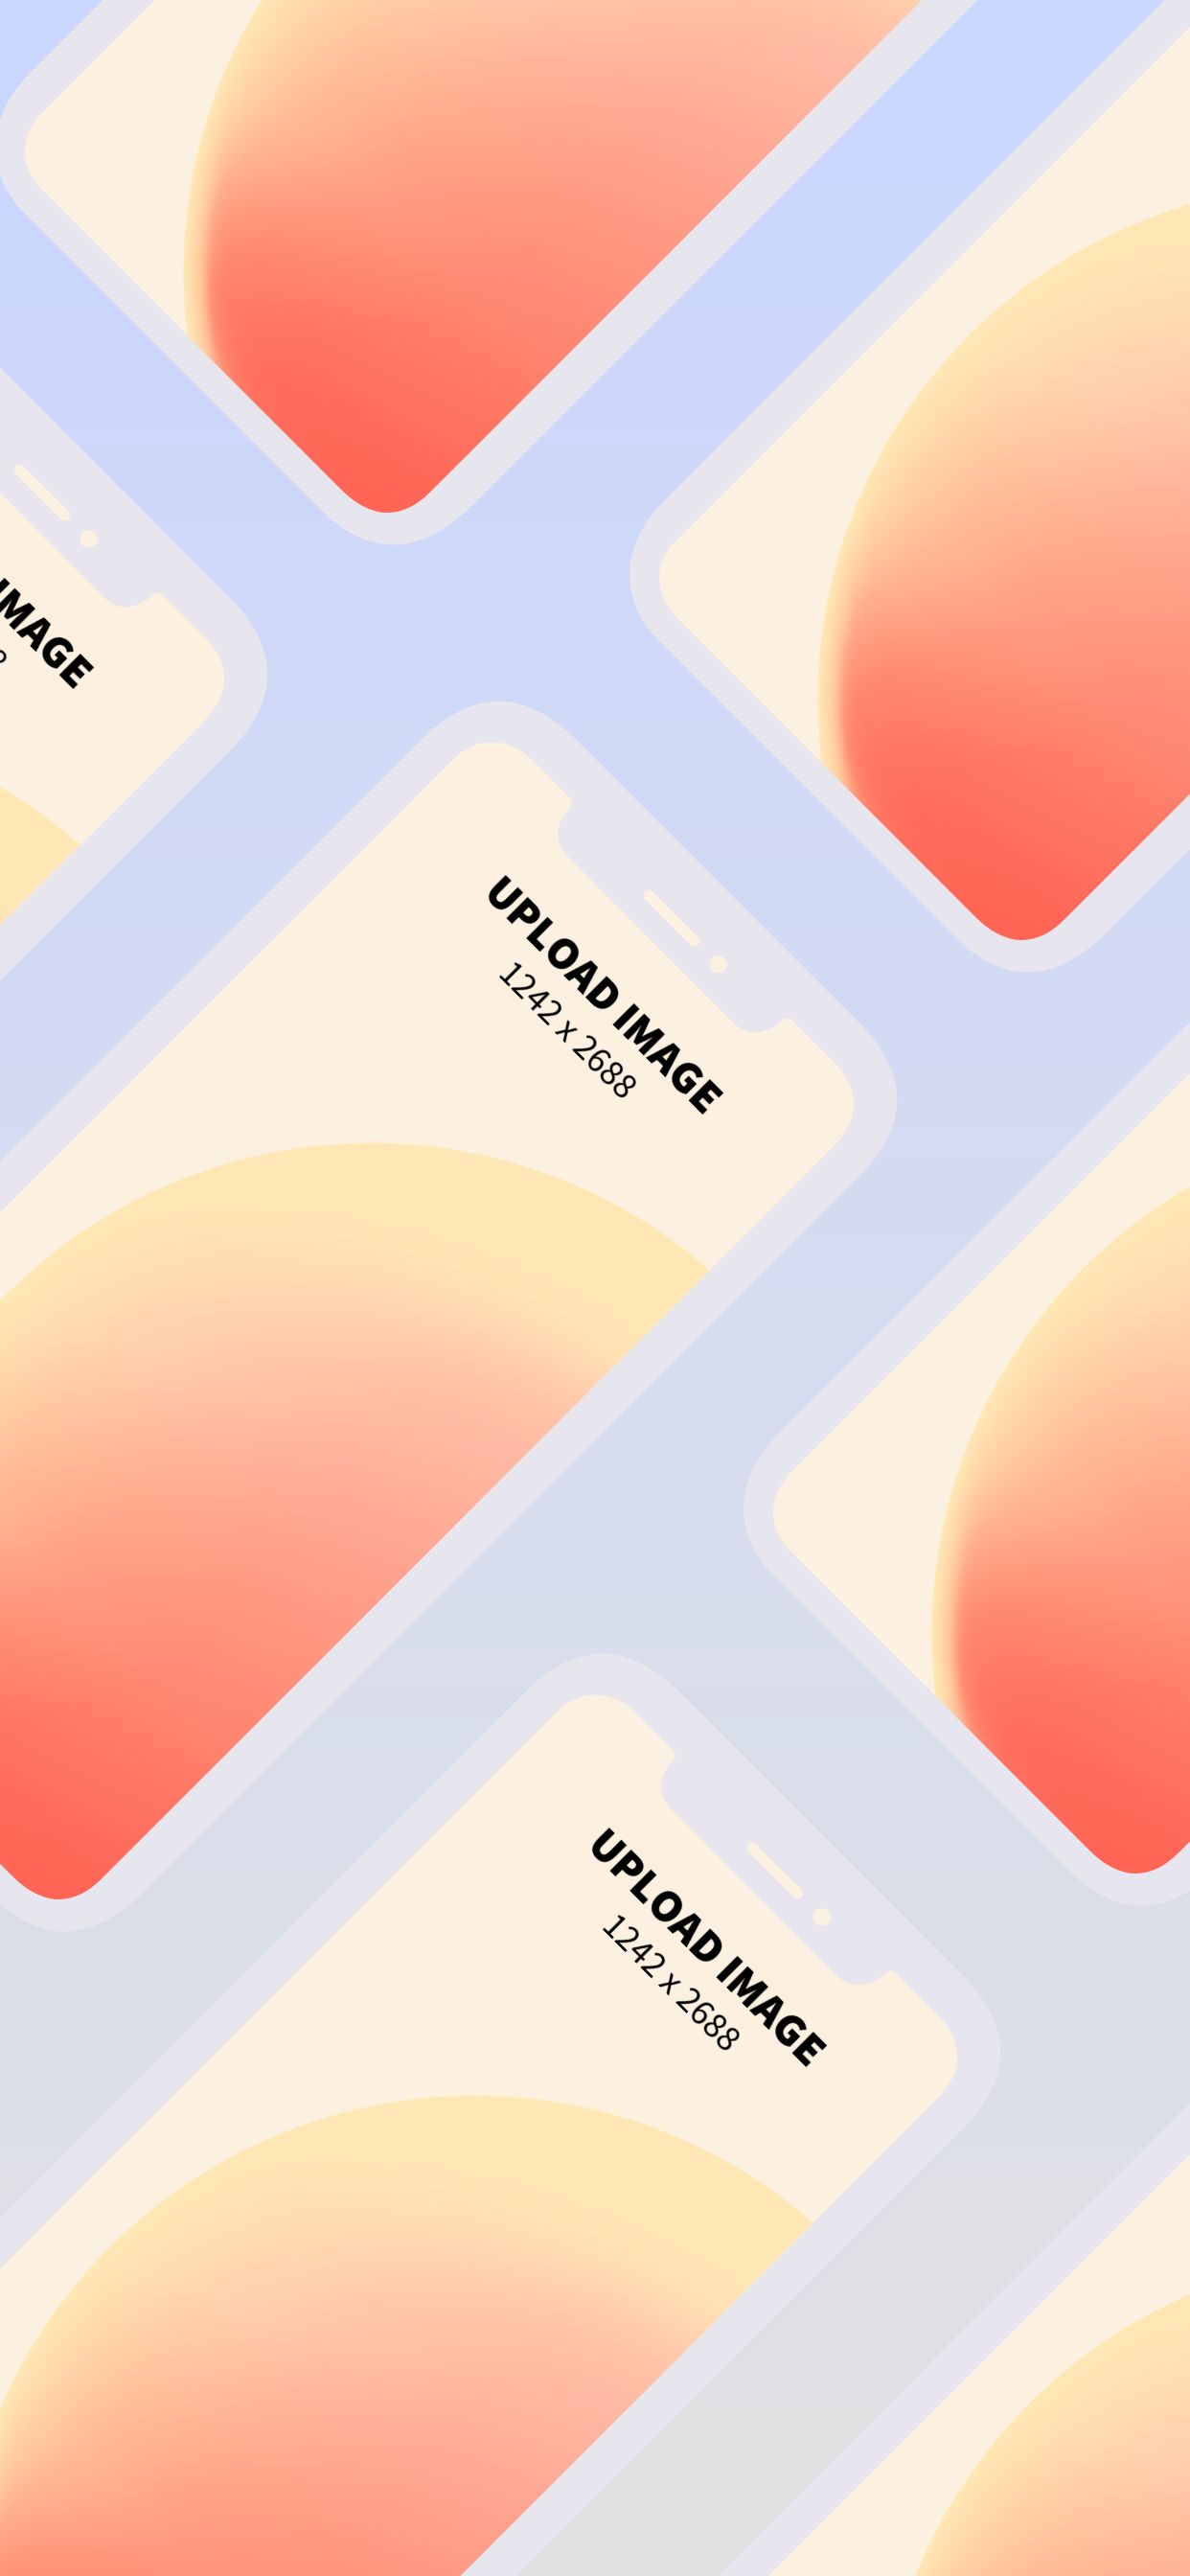 iPhone XS Max Screenshot 16 template. Quickly edit text, colors, images, and more for free.